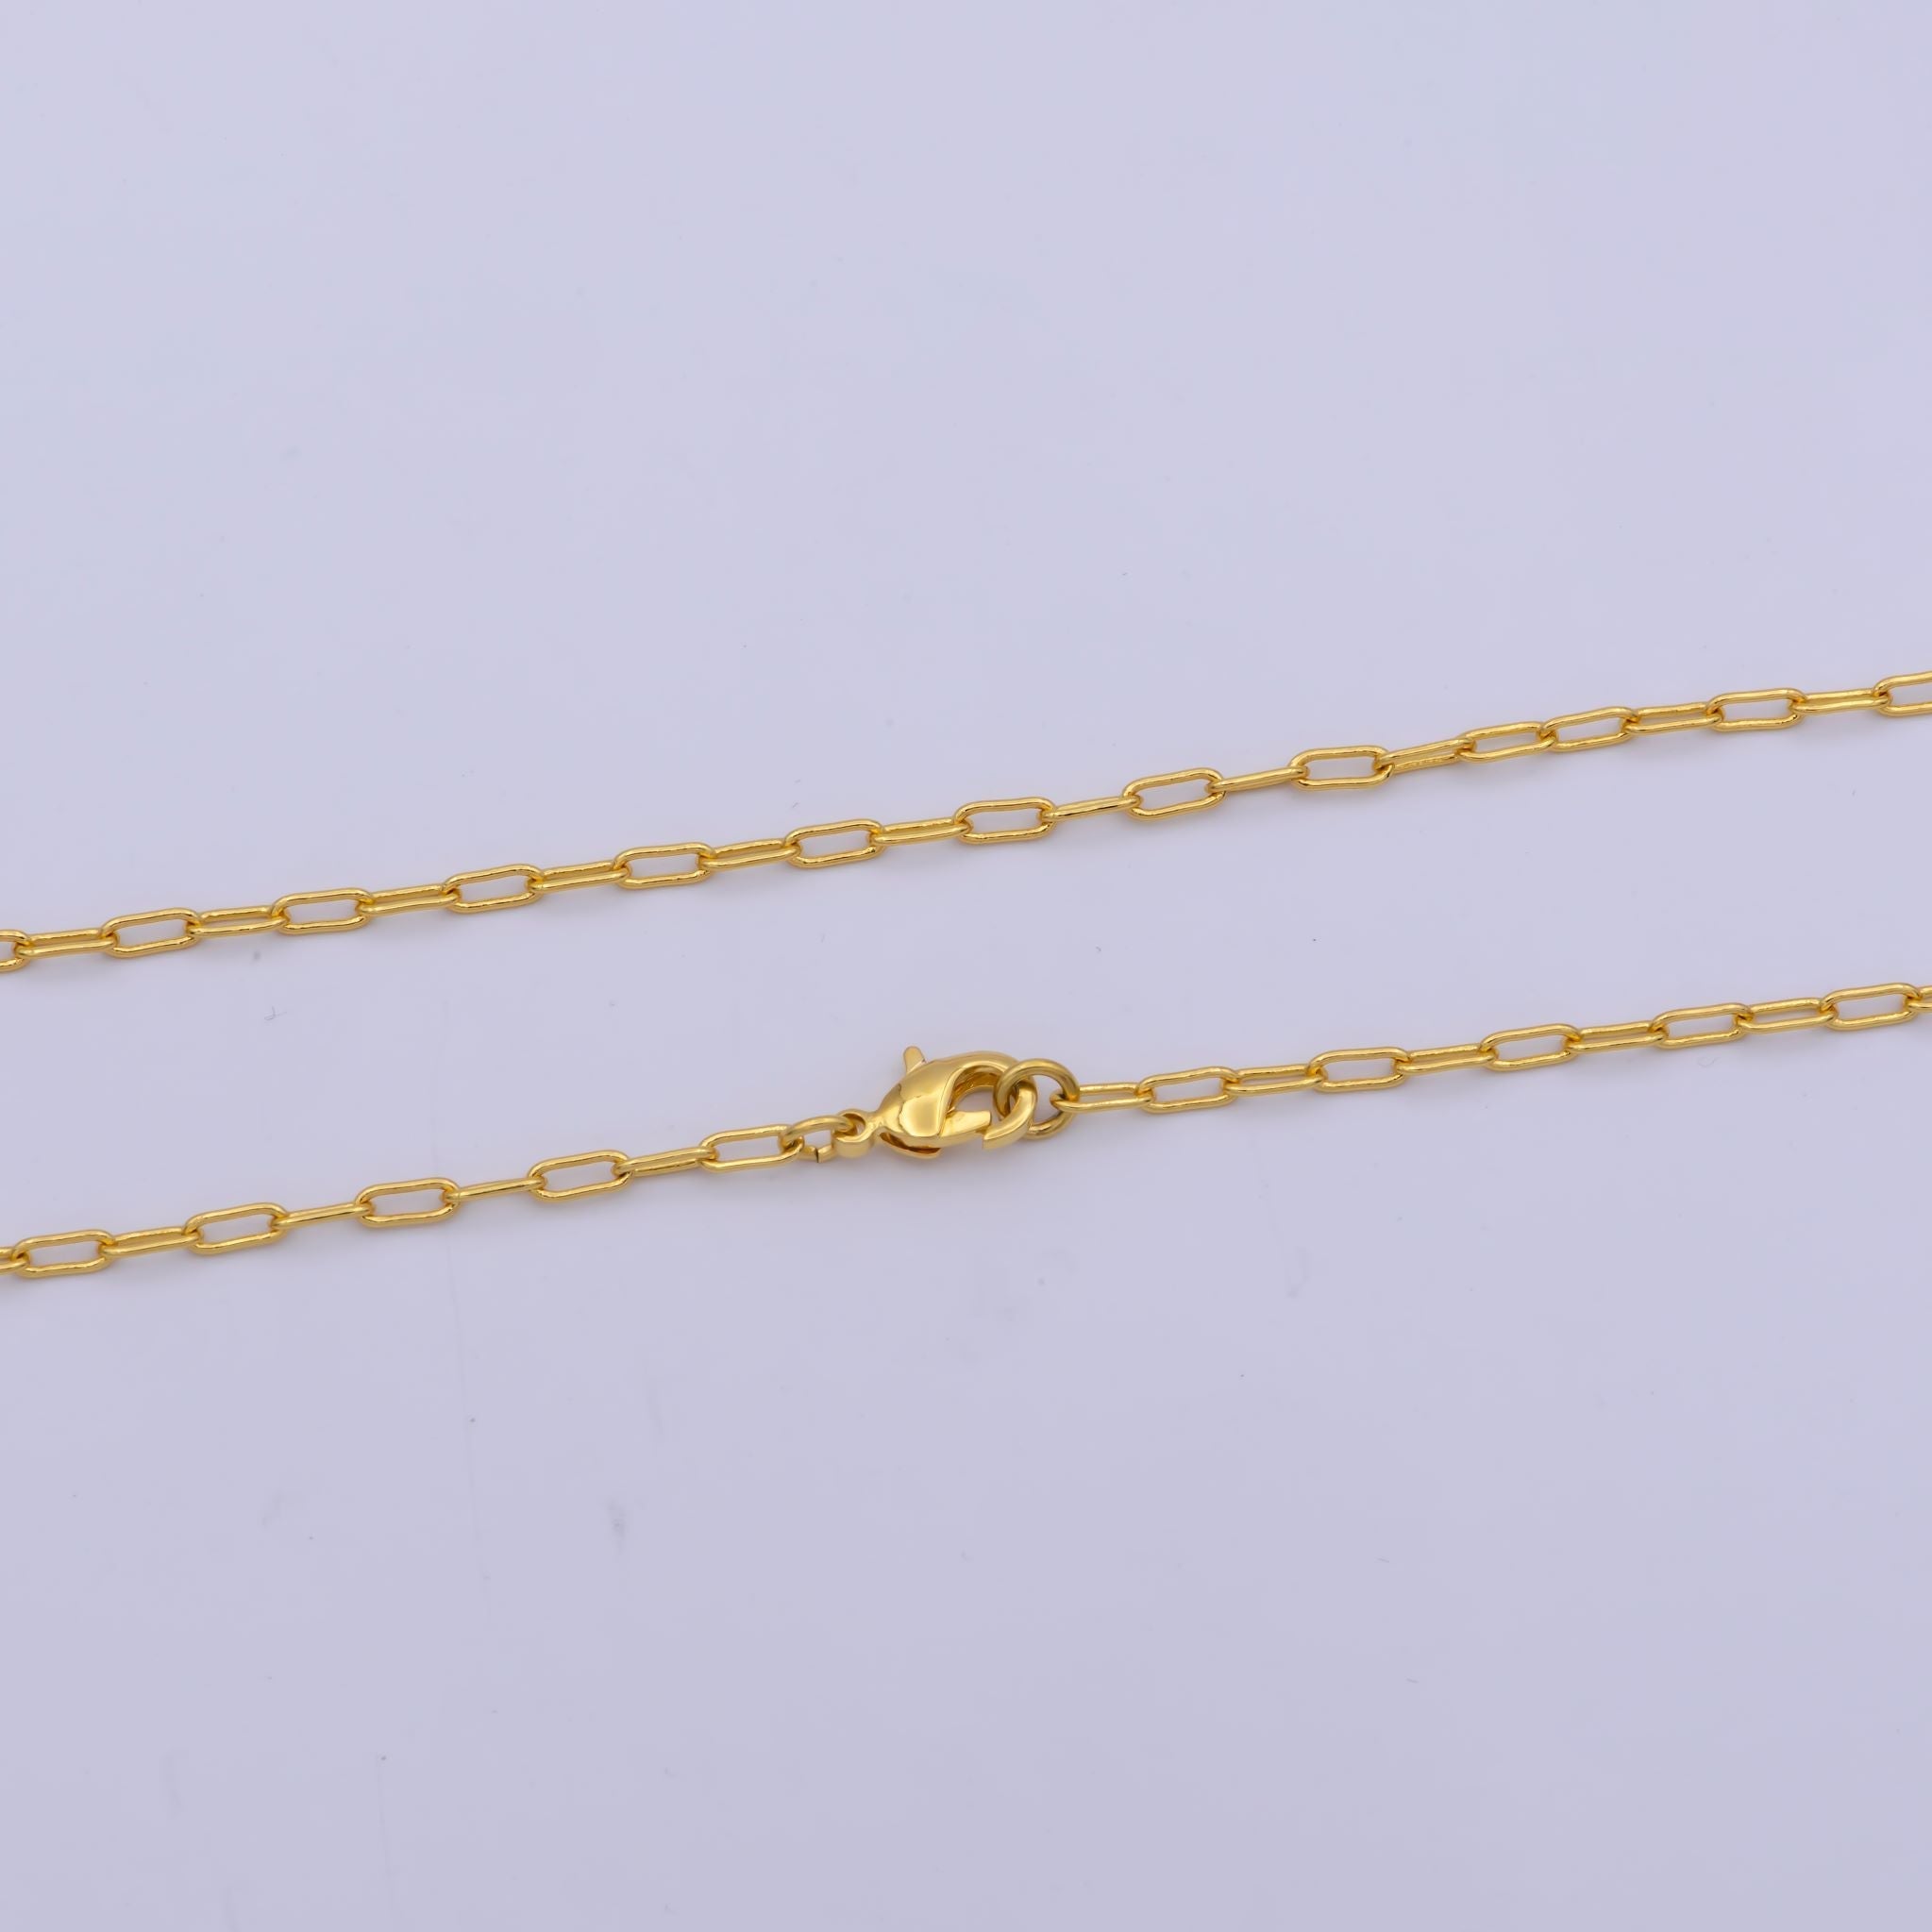 17.7" Paper clip gold chain, Dainty 24k Gold Filled chain necklace, Layering necklace, gold link necklace Ready to Wear chain necklace - DLUXCA